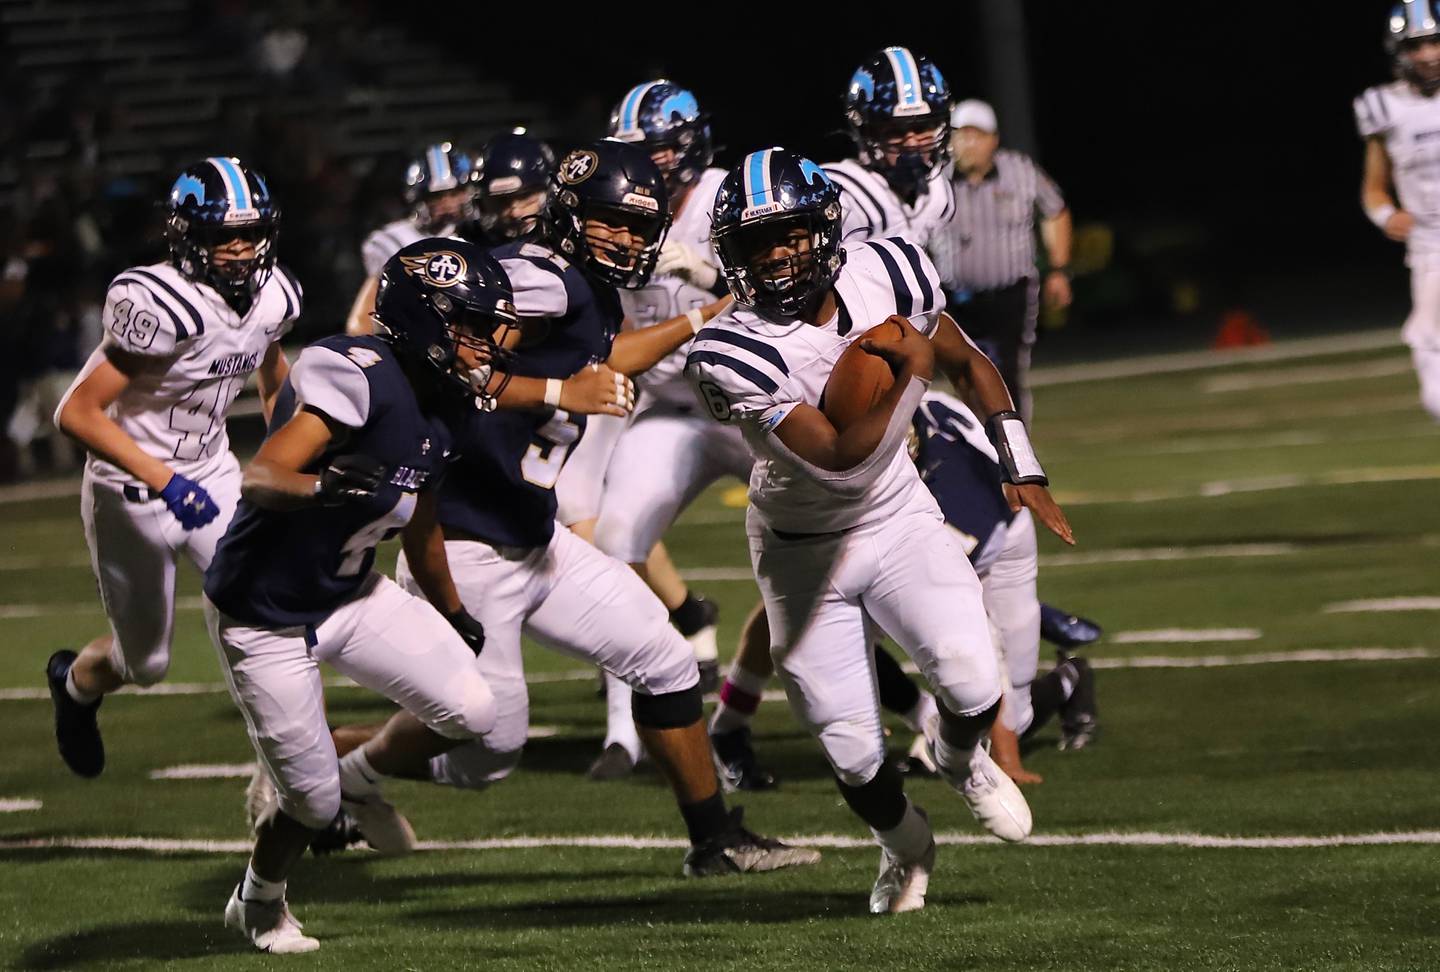 Downers Grove South sophomore Deon Davis ran for 185 yards and two touchdowns in the Mustangs' win over Addison Trail on Friday, Oct. 8.